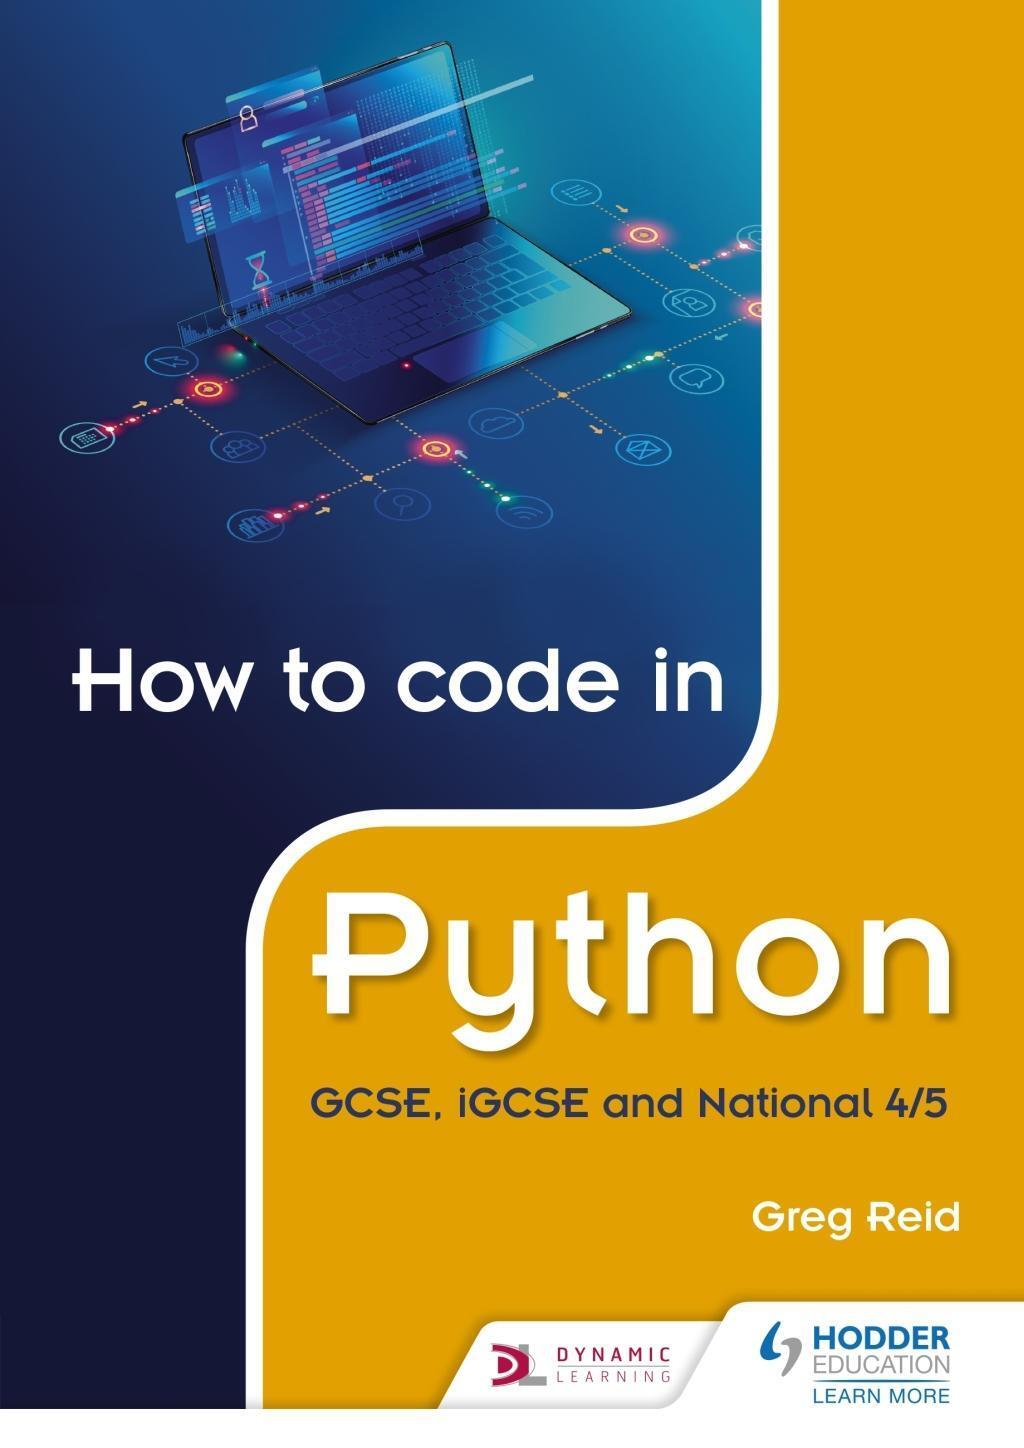 Cover: 9781510461826 | Reid, G: How to code in Python: GCSE, iGCSE, National 4/5 an | Reid